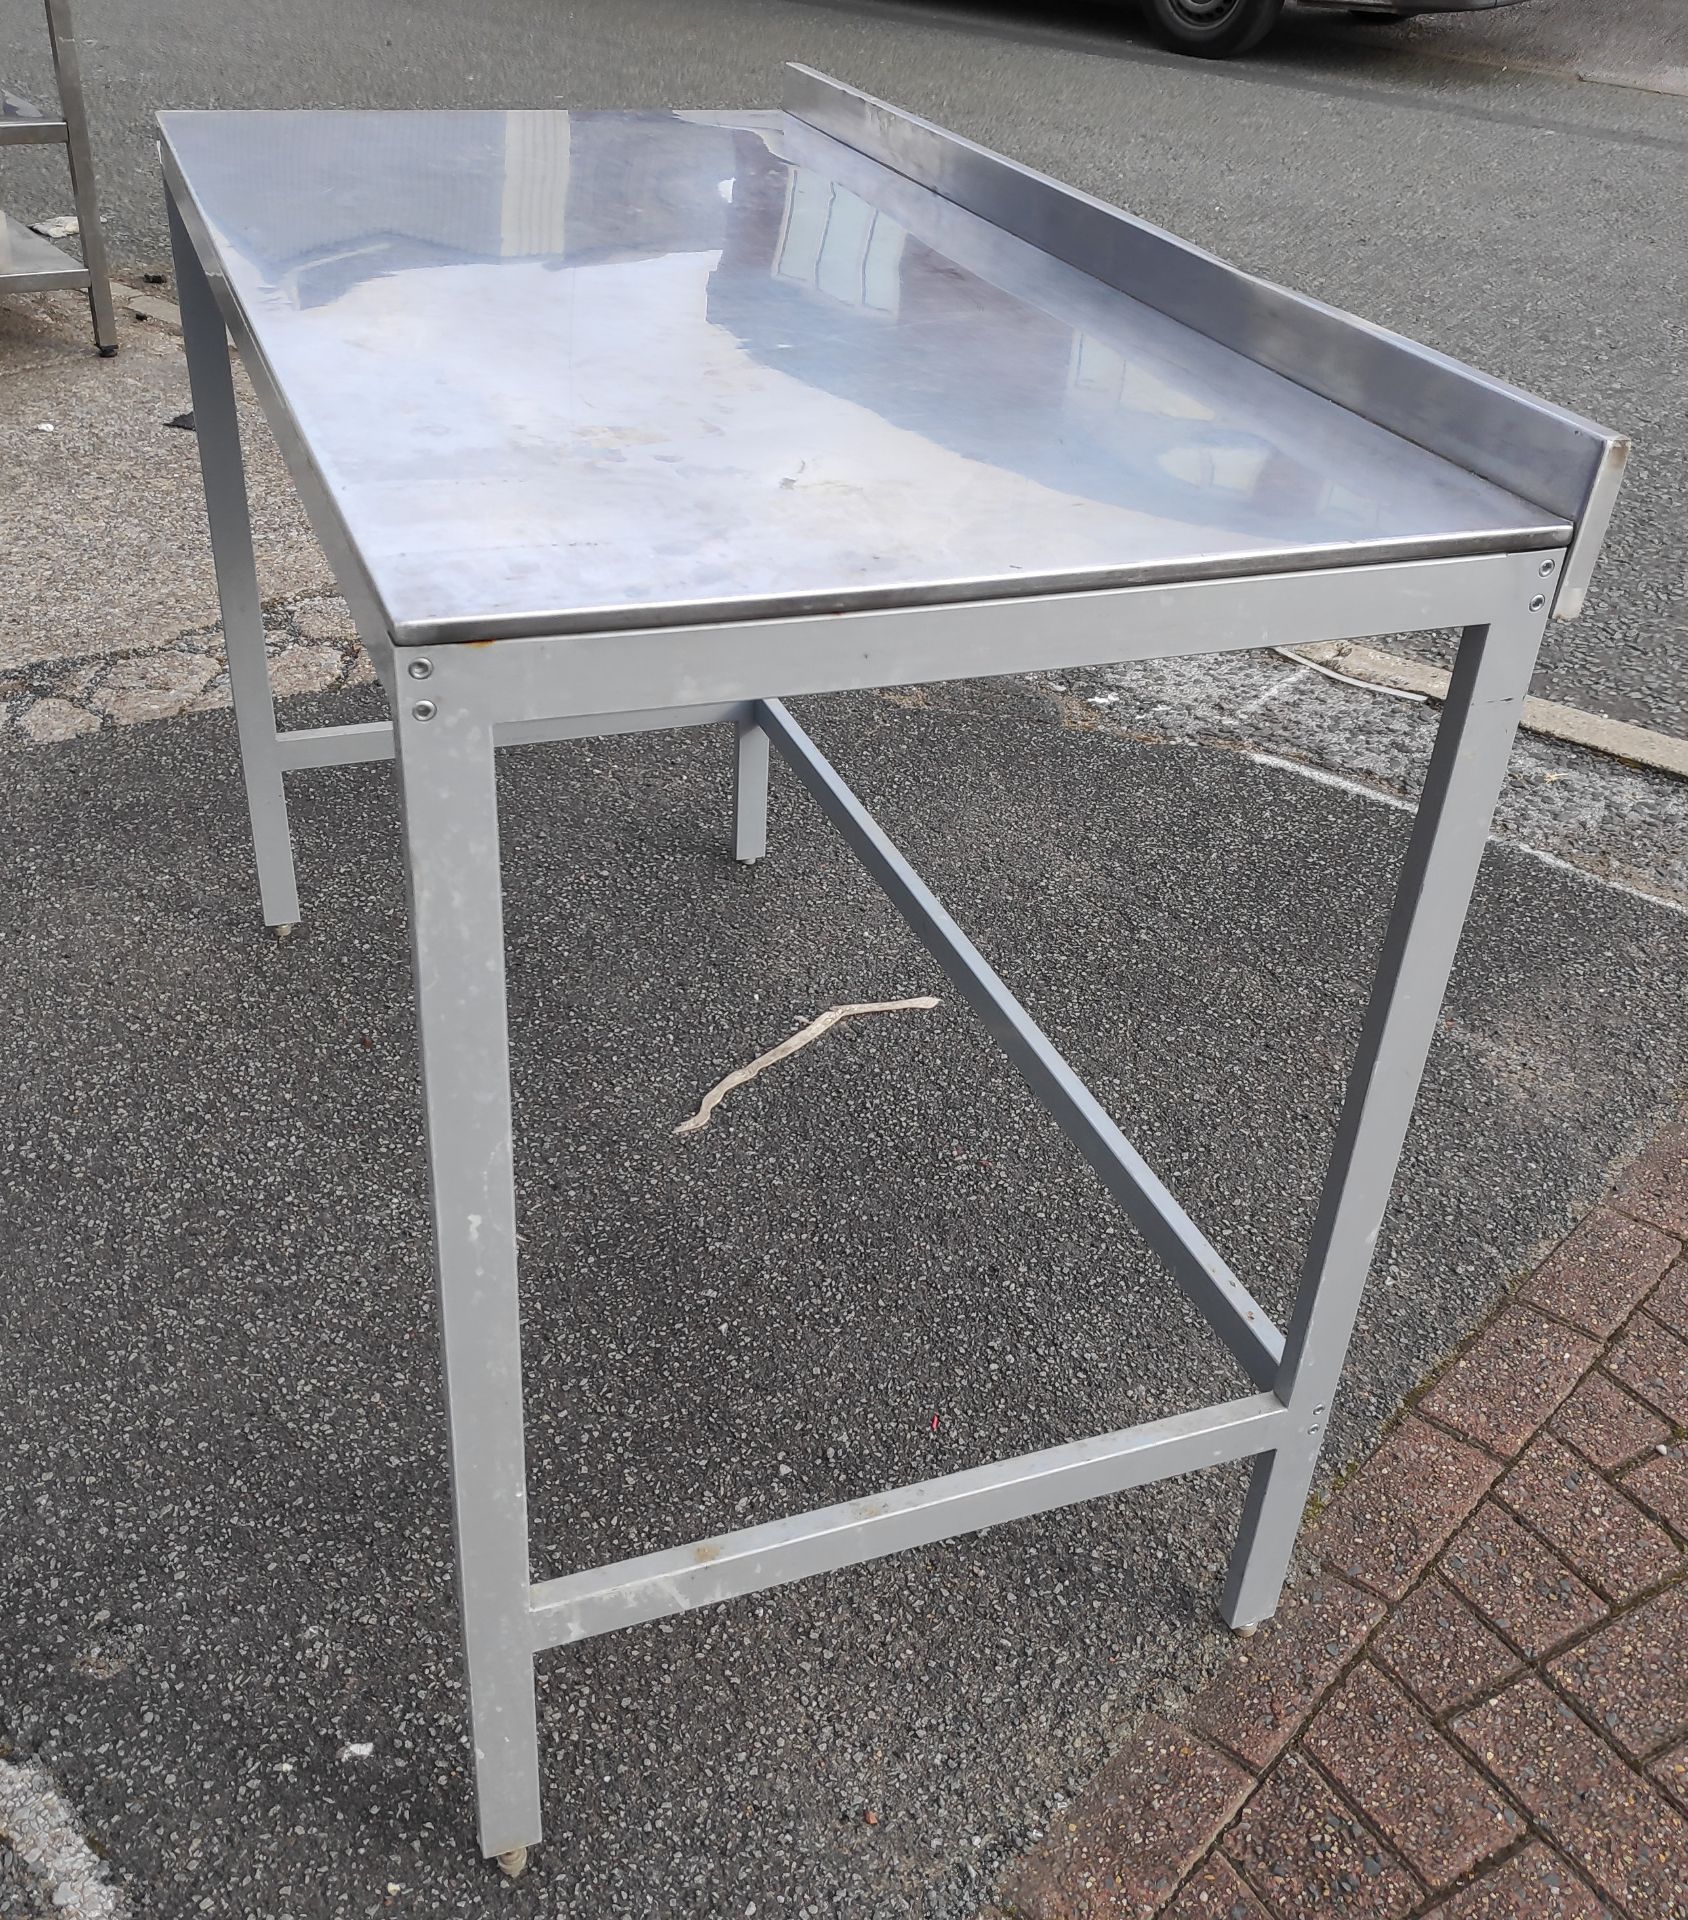 1 x Stainless Steel Prep Bench with Upstand - 126cm (L) x 64.5cm (D) x 95cm (H) - JMCS107 - CL723 - - Image 2 of 7